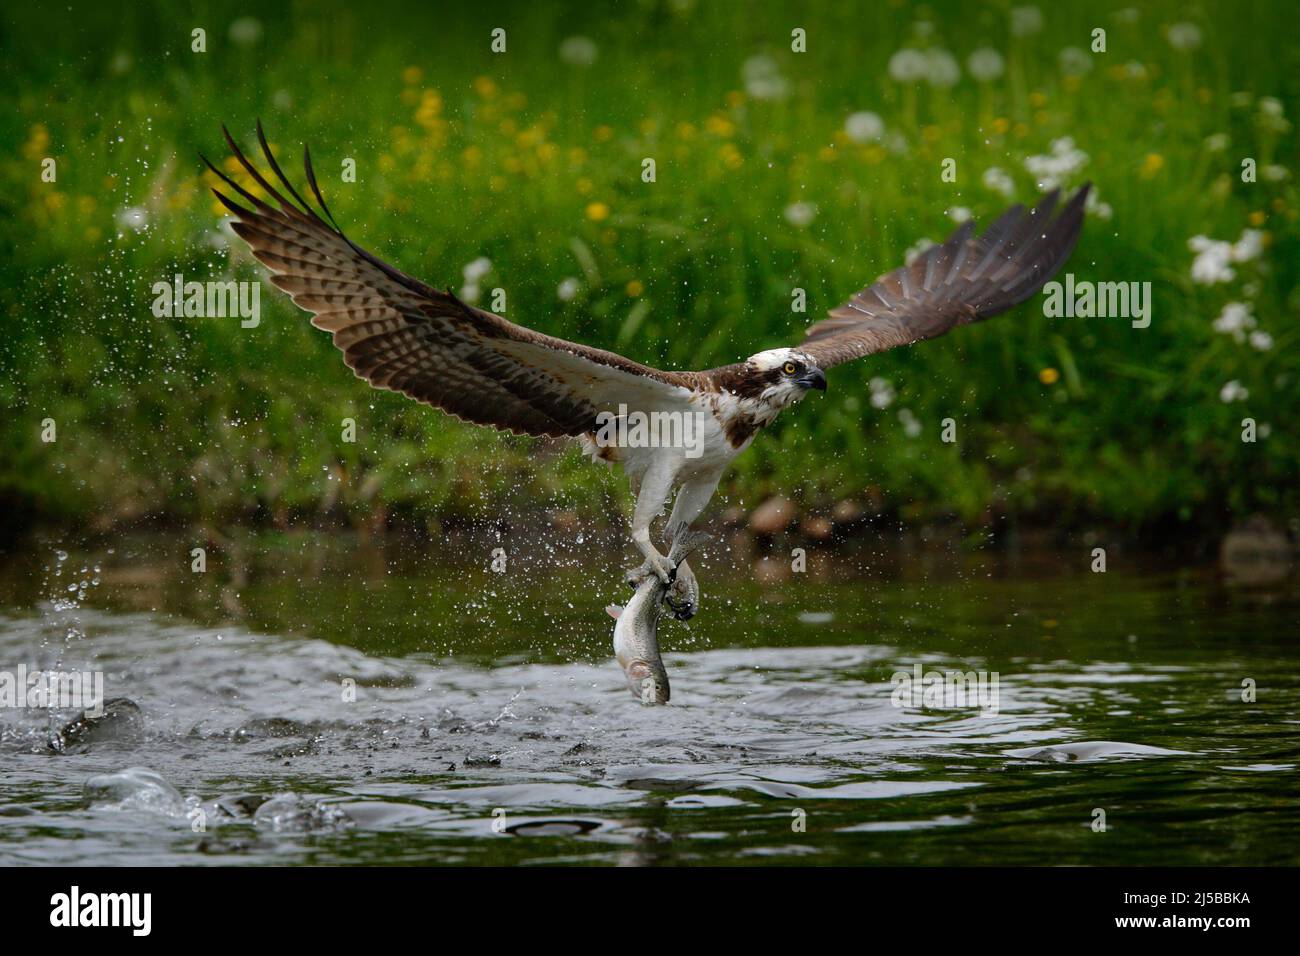 Osprey catching fish. Flying osprey with fish. Action scene with